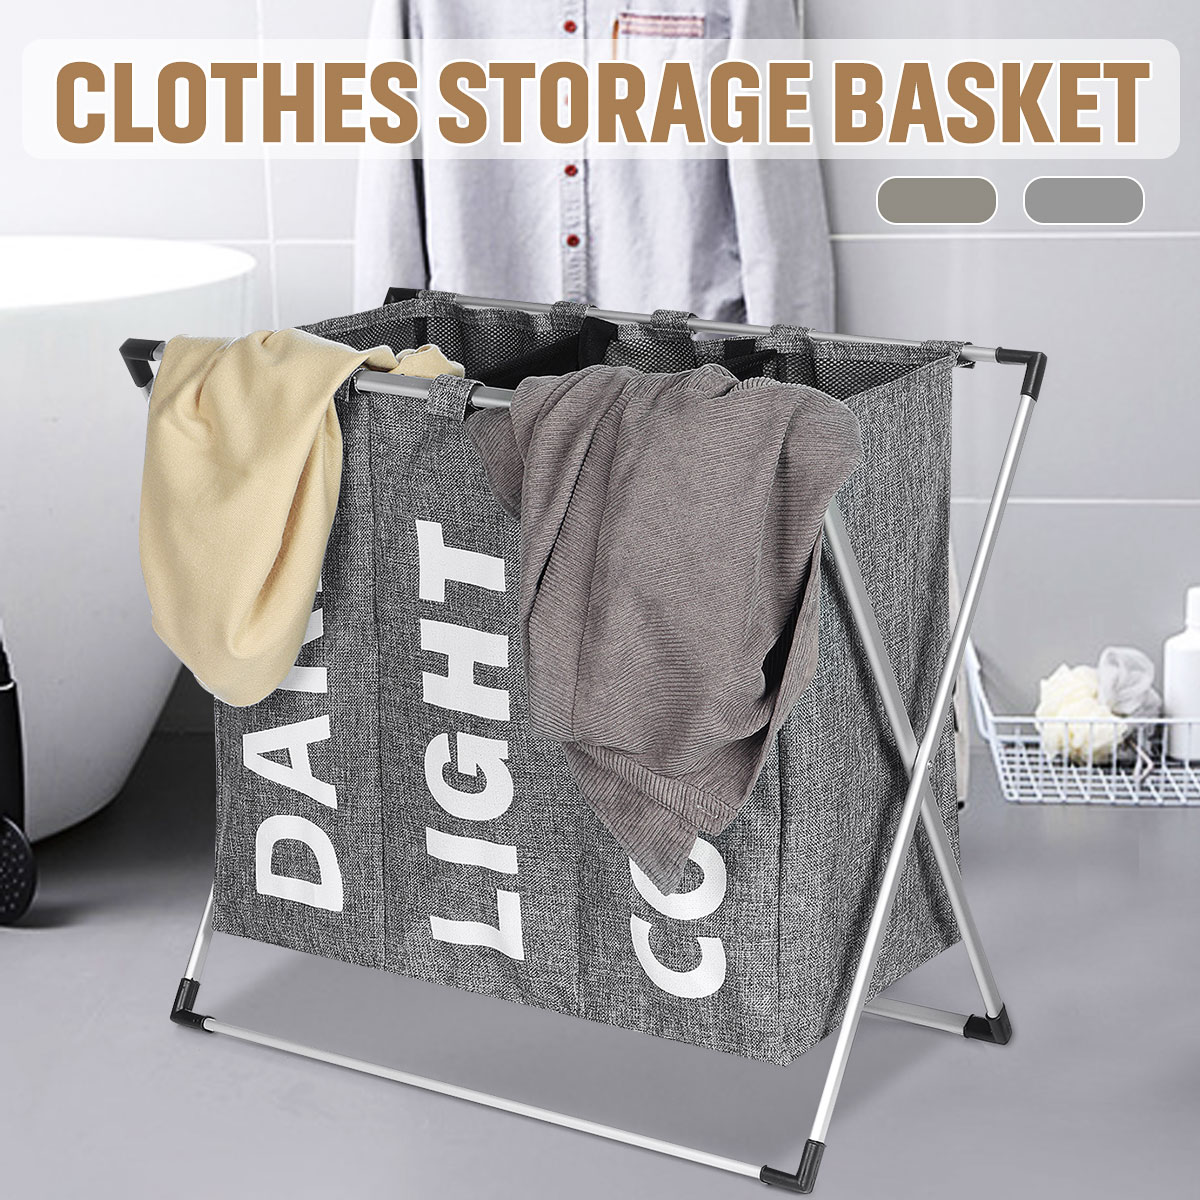 Foldable-Laundry-Basket-Folding-Dirty-Clothes-Bag-Washing-Bin-Home-Clothes-Organizer-with-Handle-1785430-1